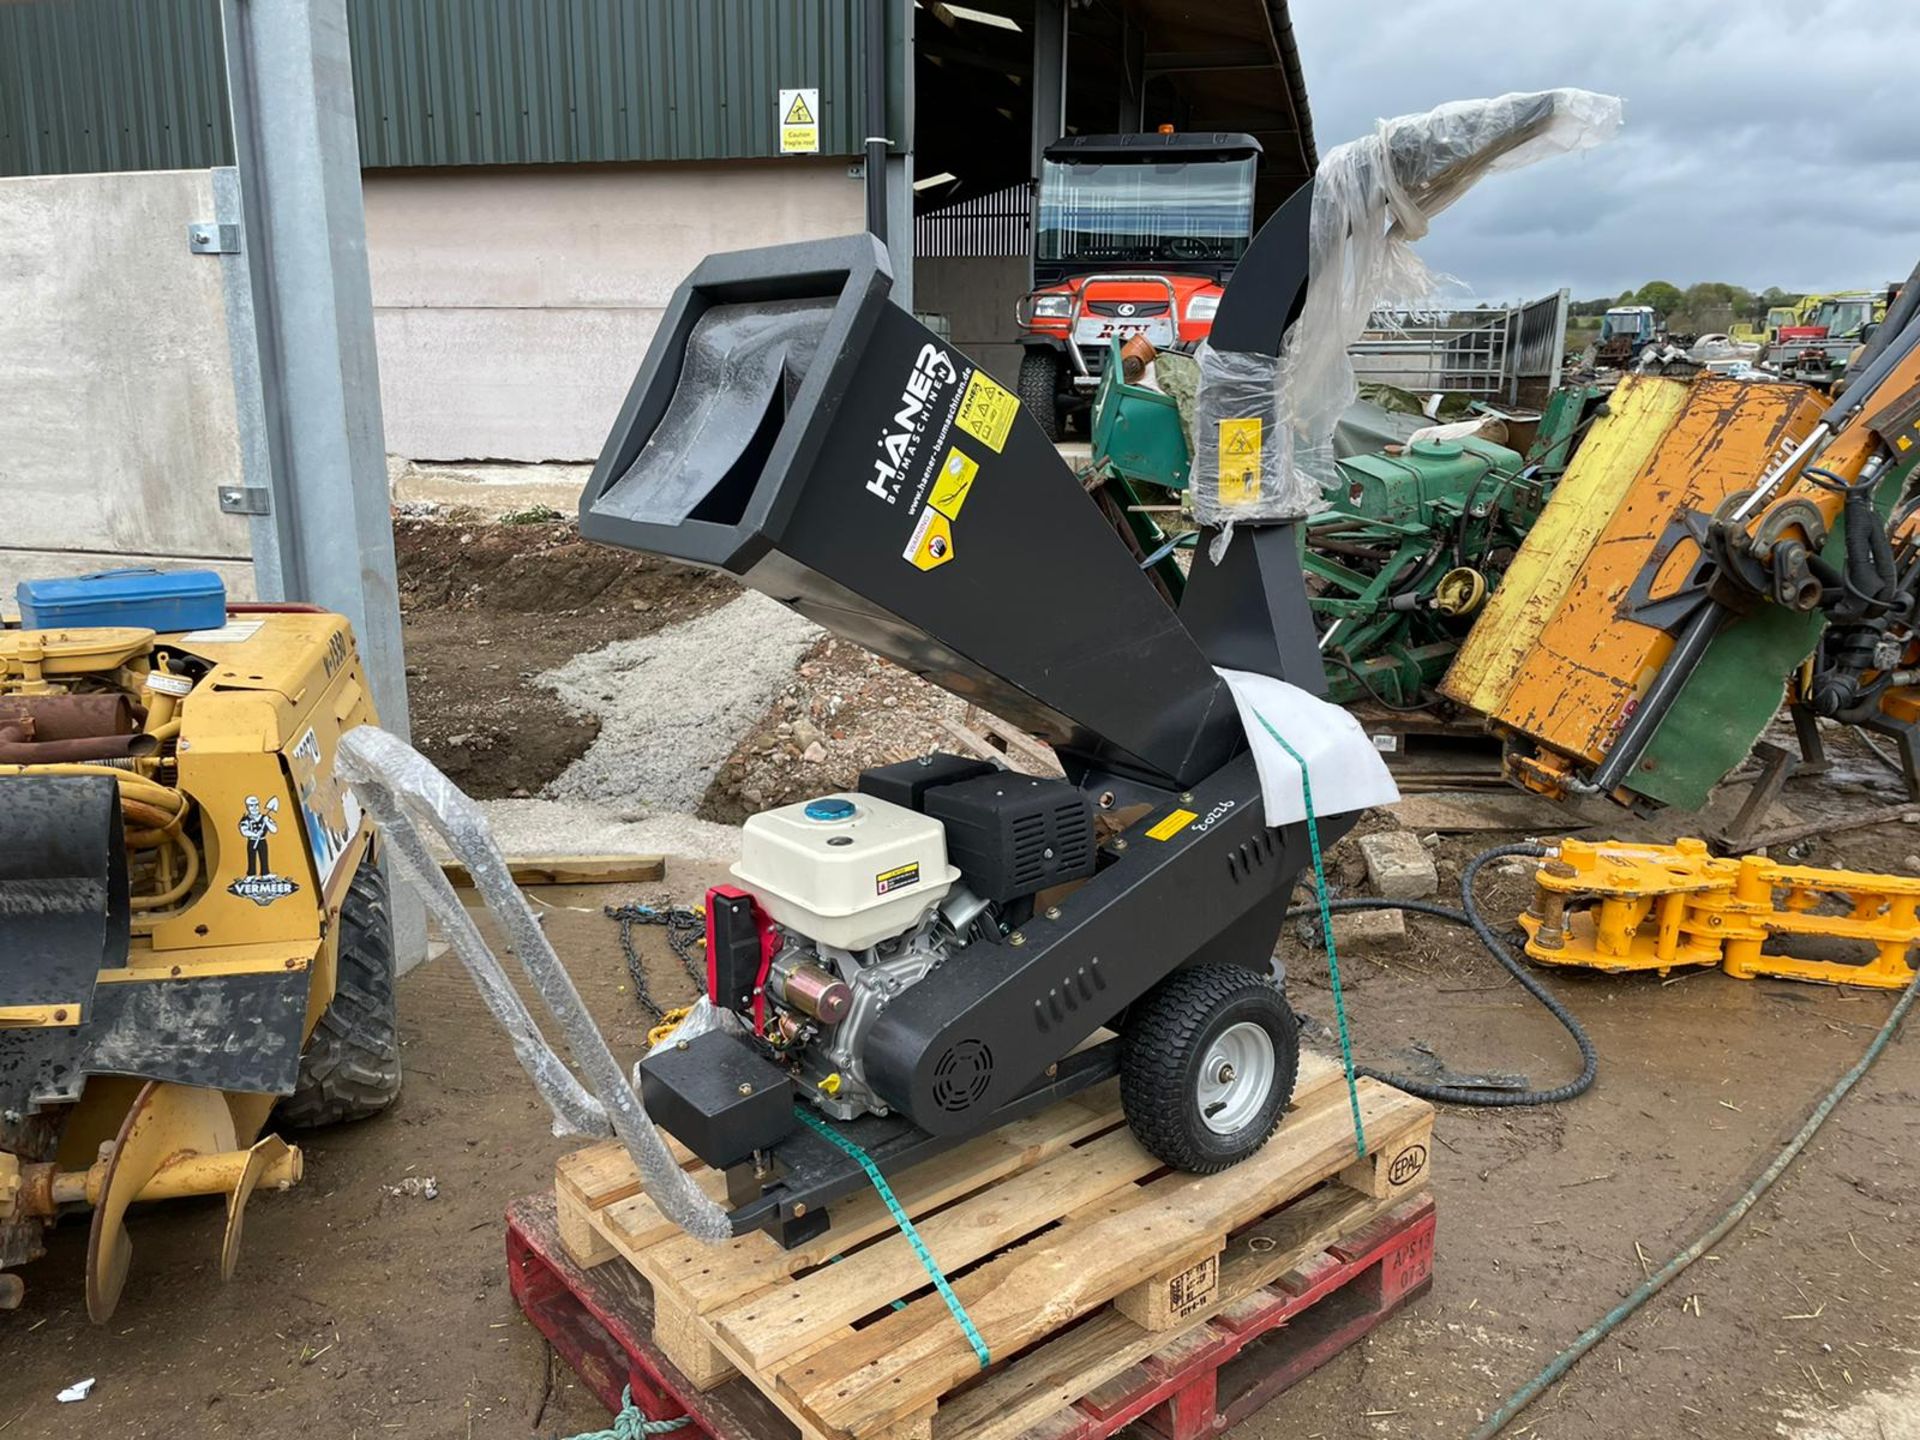 BRAND NEW AND UNUSED HANER HHH150E WOOD CHIPPER, TAKES 4.5" WOOD, FULLY ASSEMBLED READY FOR WORK - Image 3 of 8